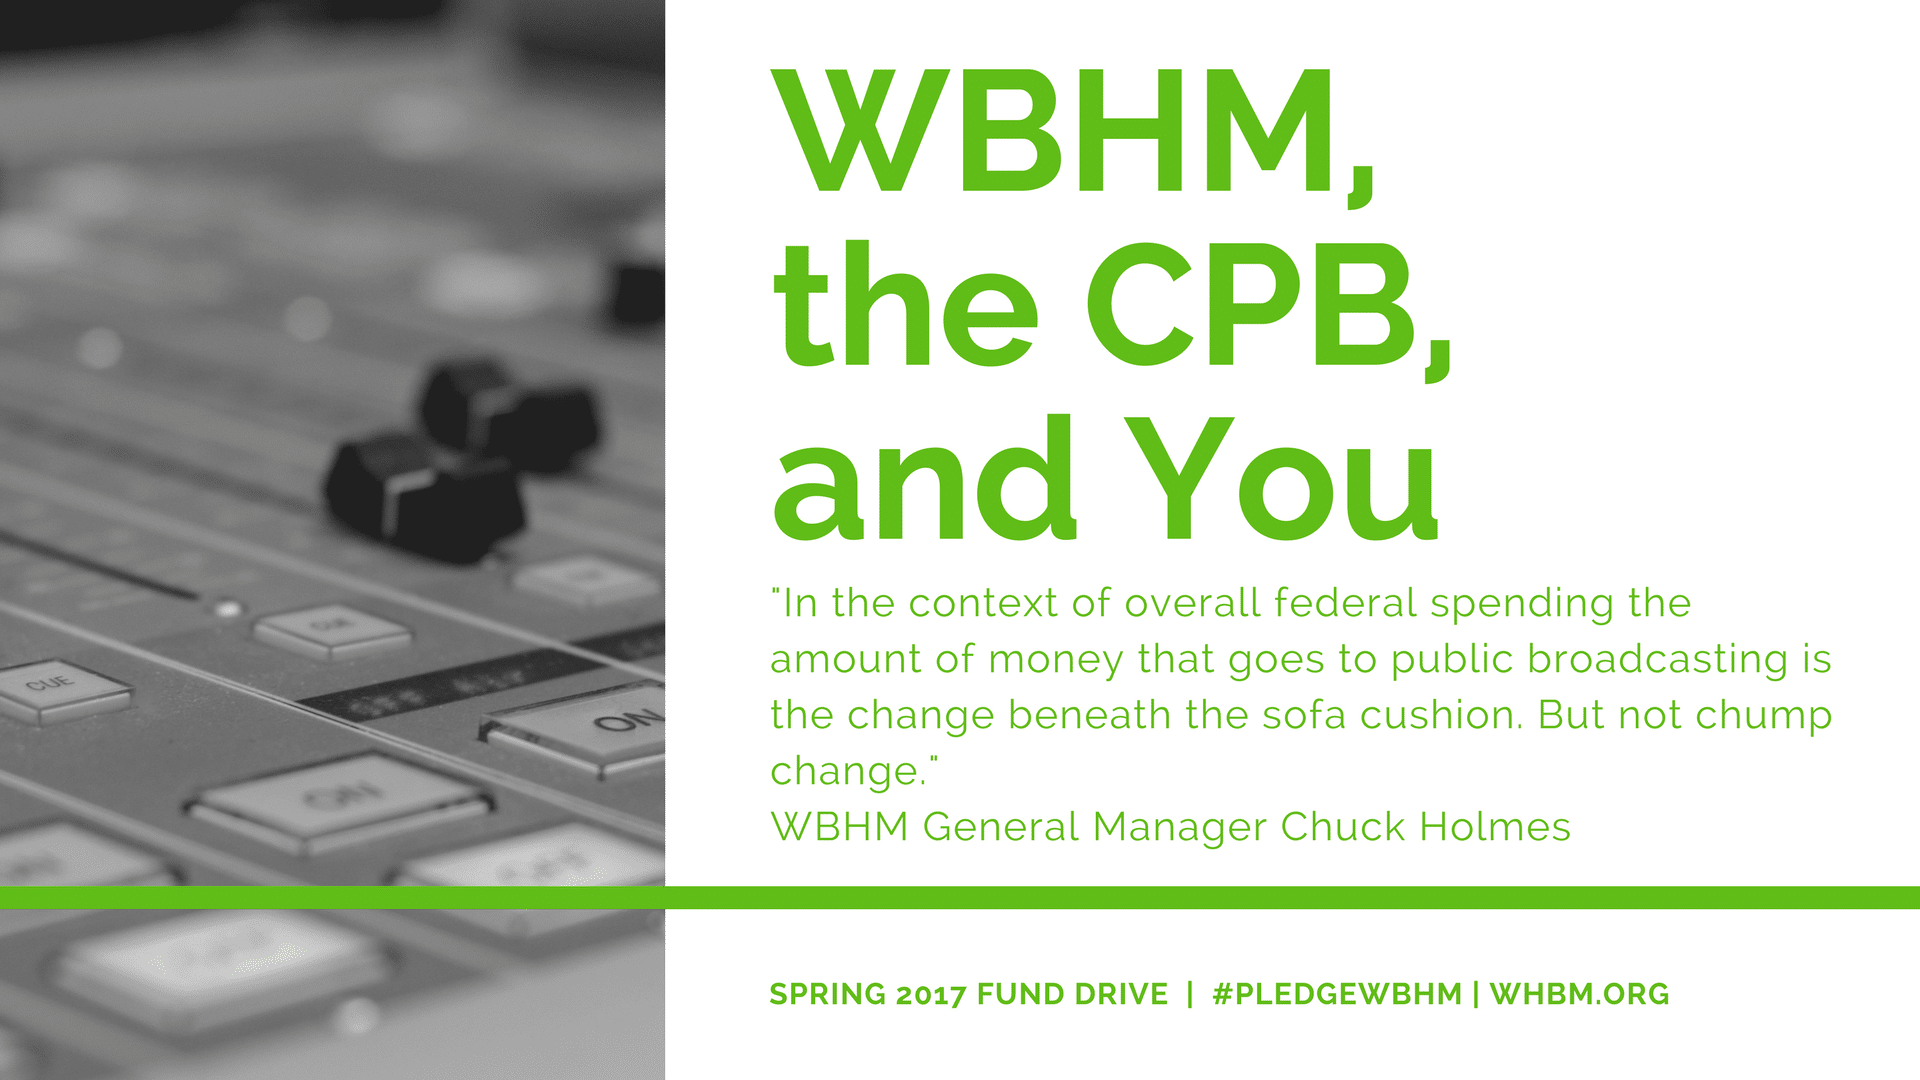 WBHM, the CPB, and You